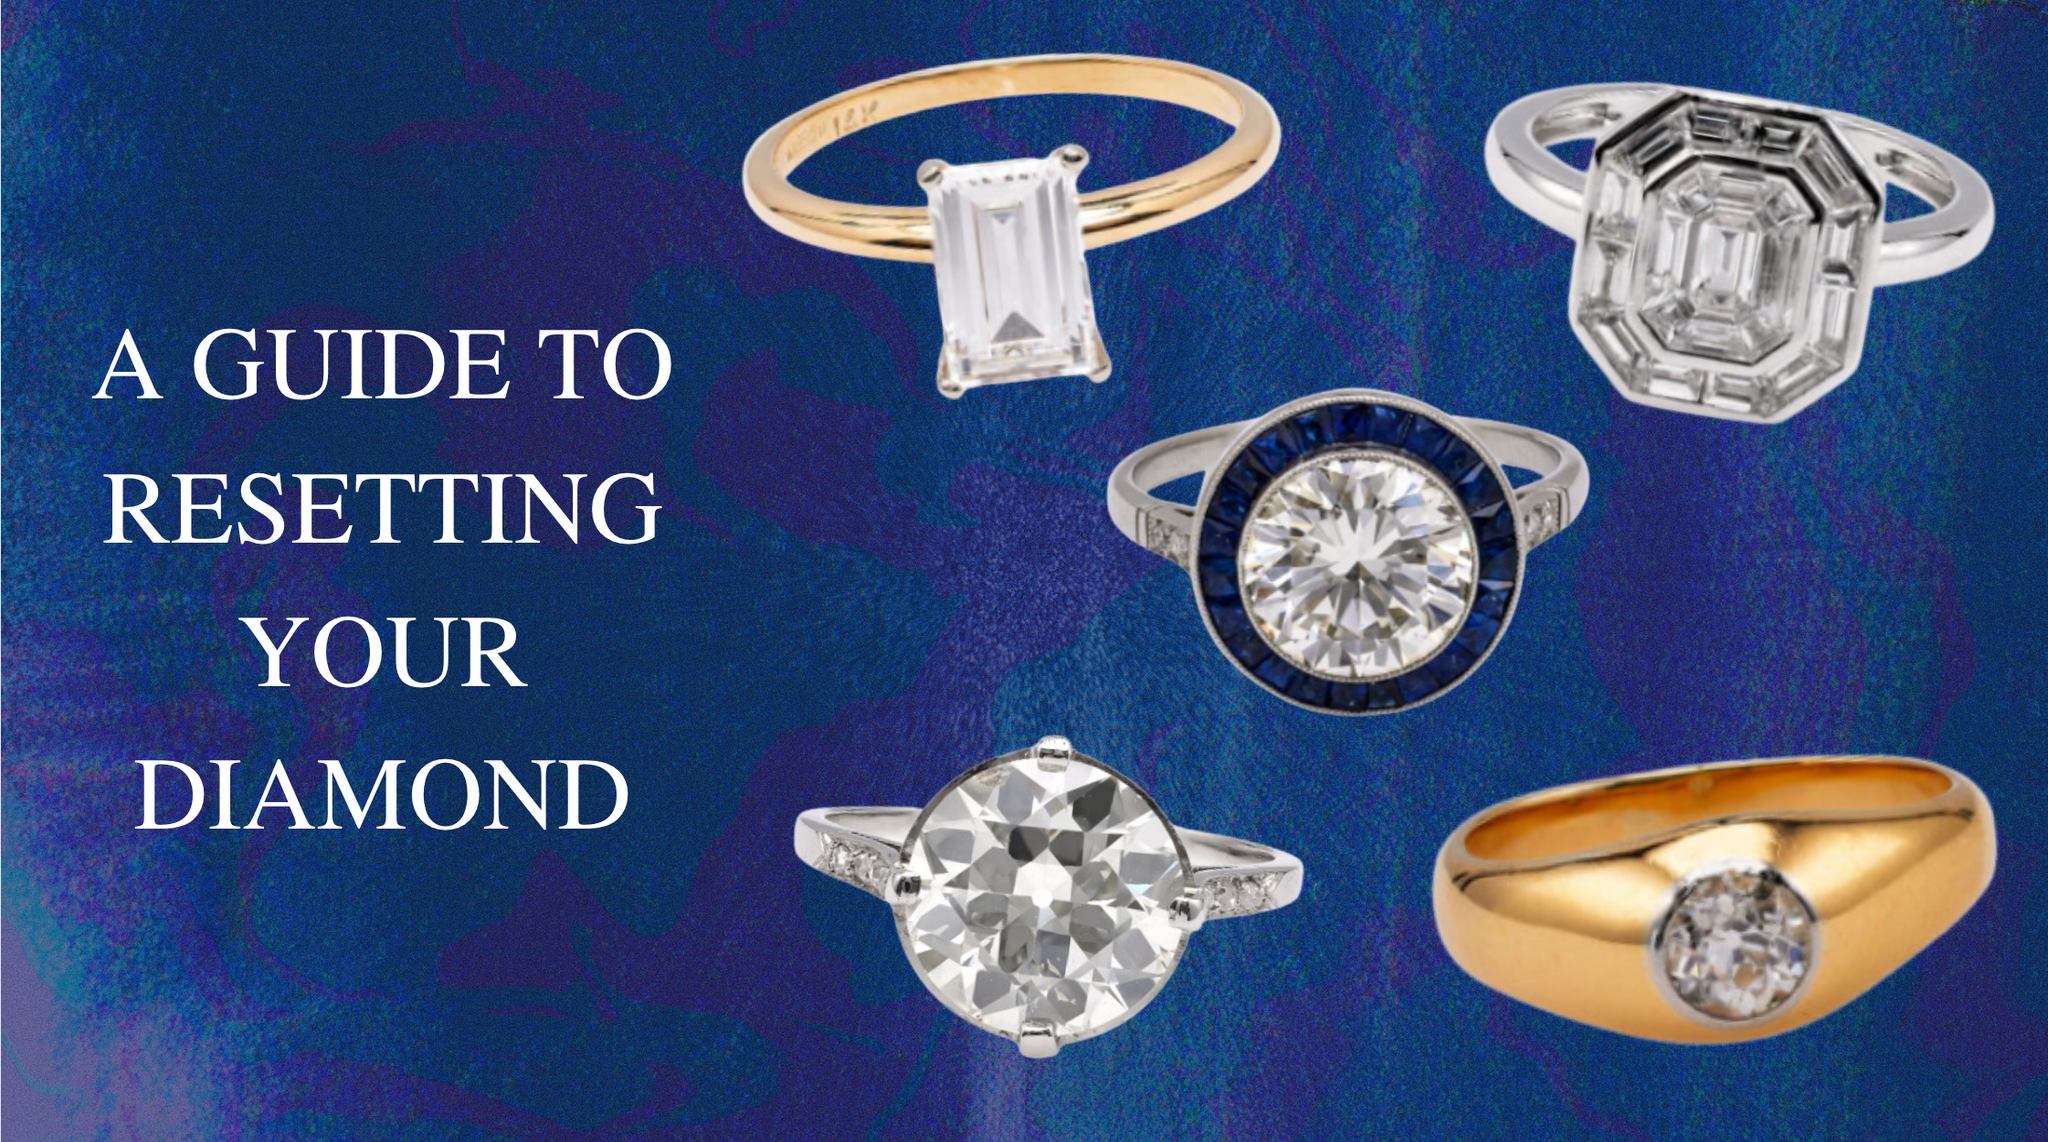 A Guide to Resetting your diamonds - Jack Weir & Sons